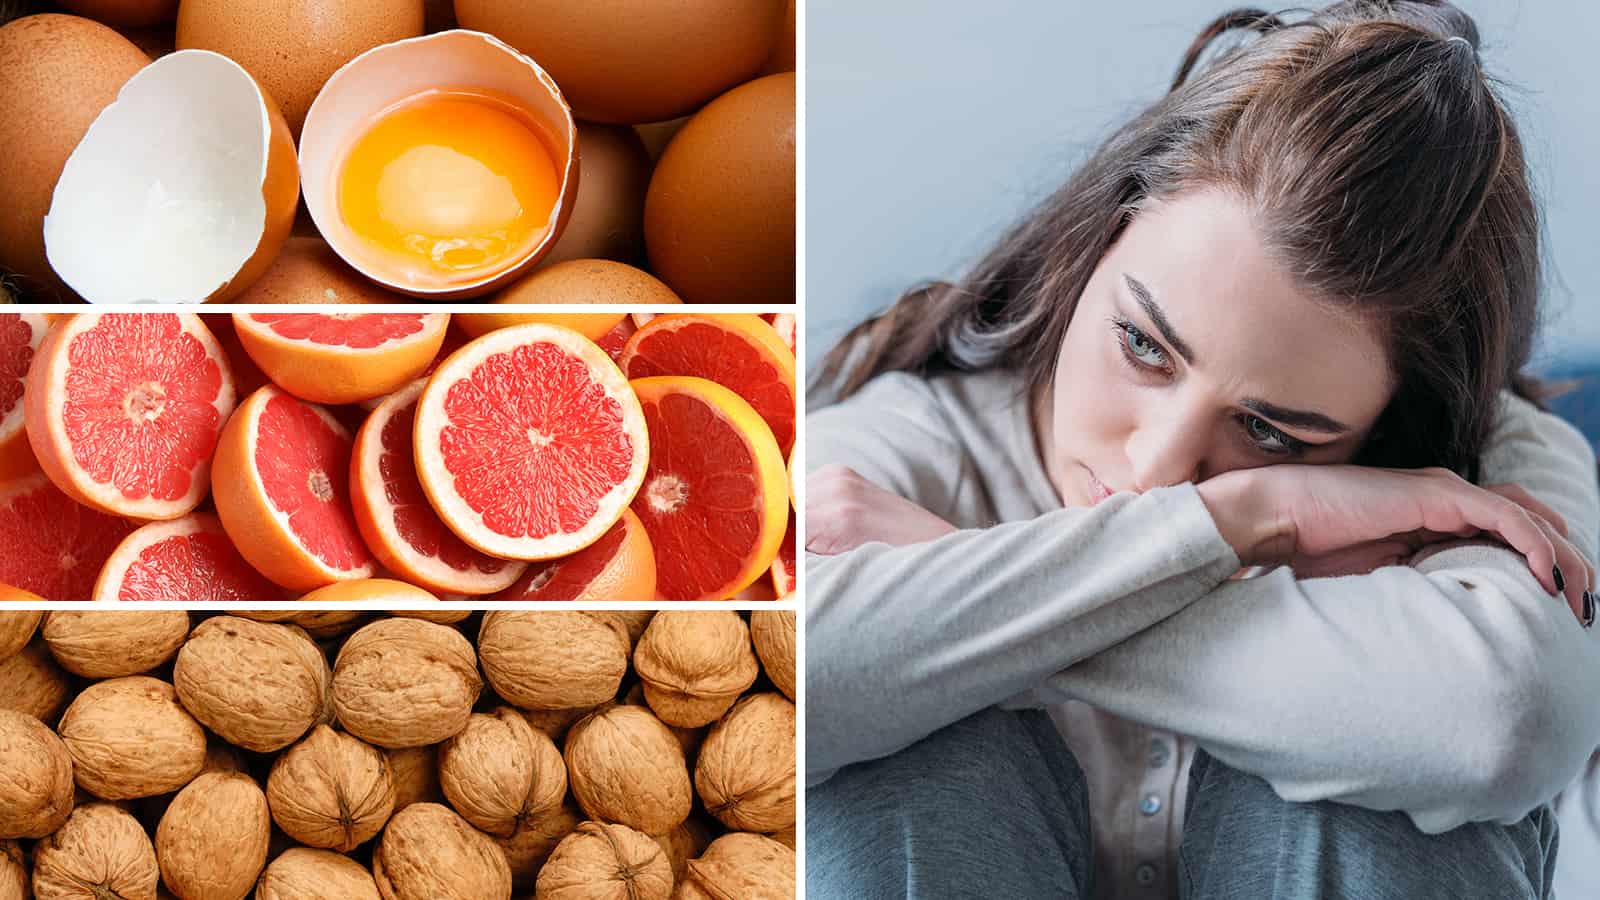 15 Cortisol-Reducing Foods to Calm Your Anxious Mind